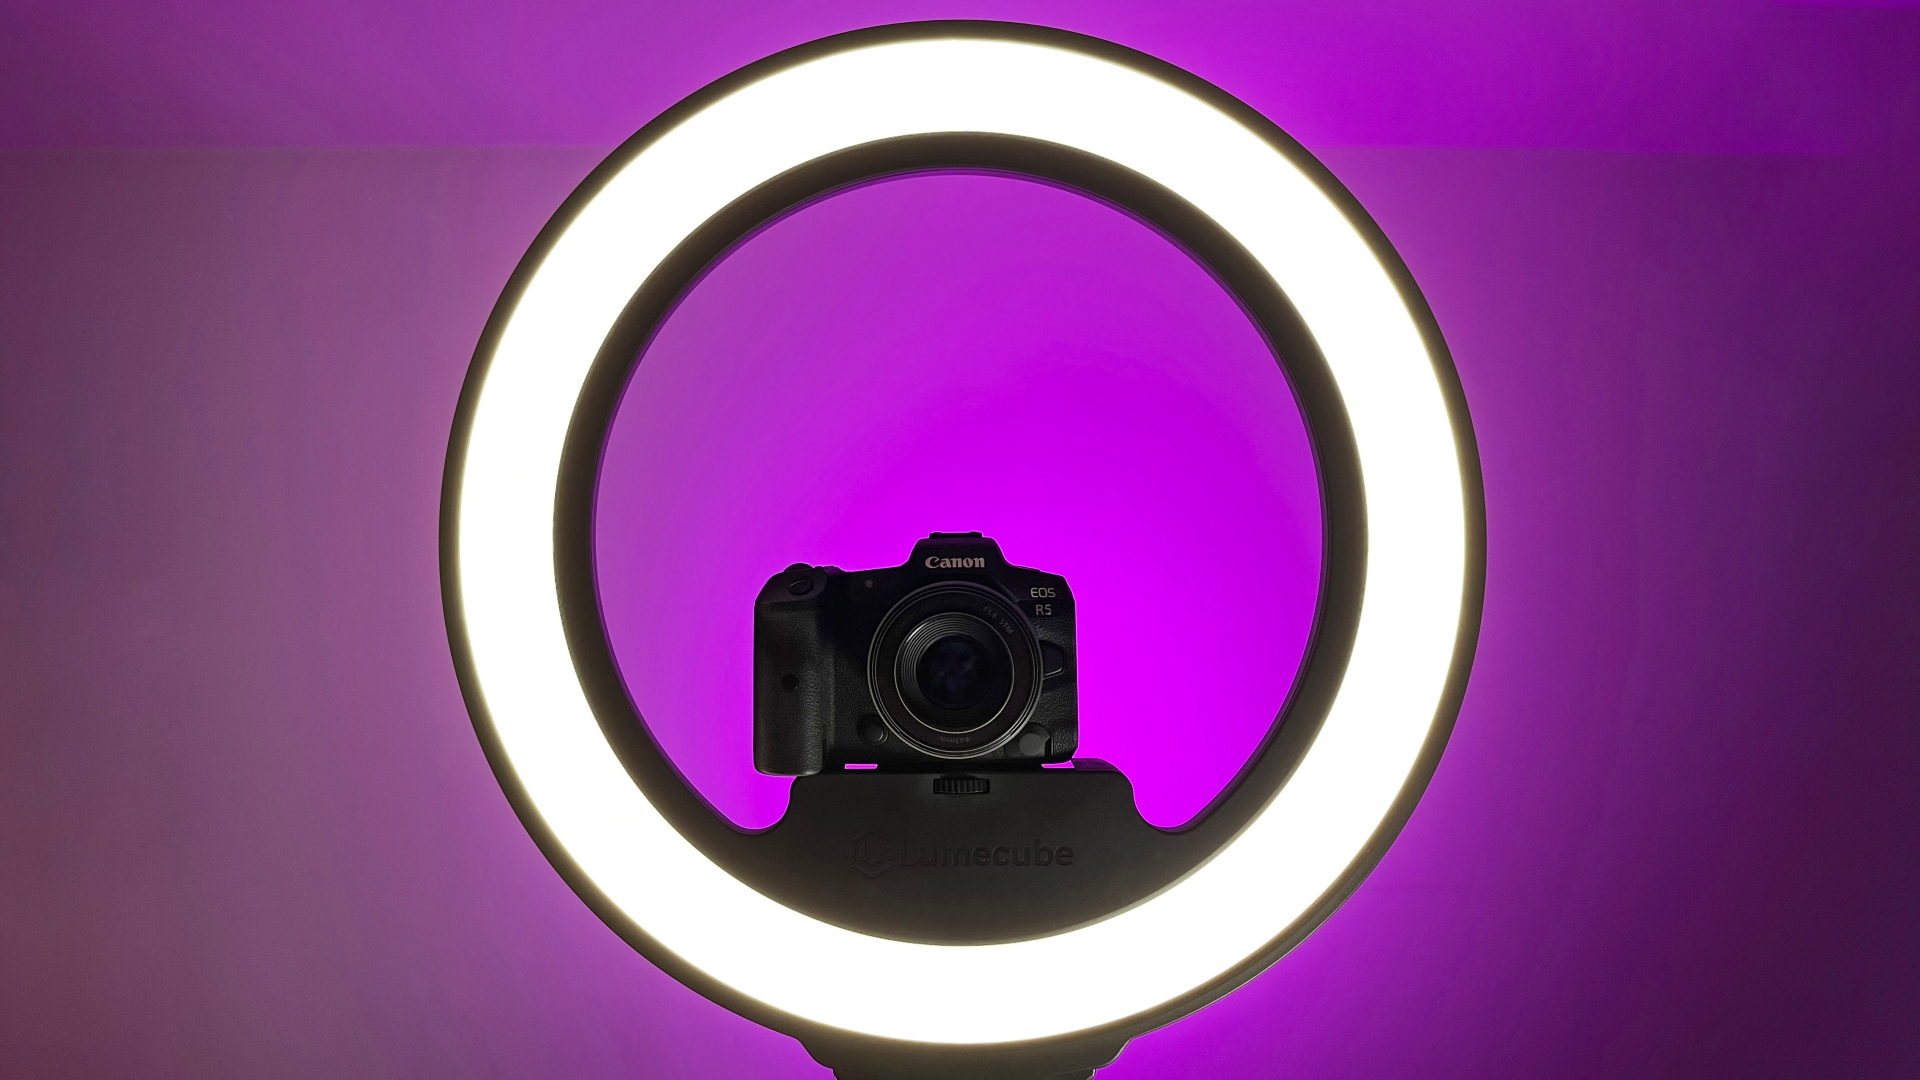 Lume Cube Ring Light Pro review image showing a camera mounted in the light.